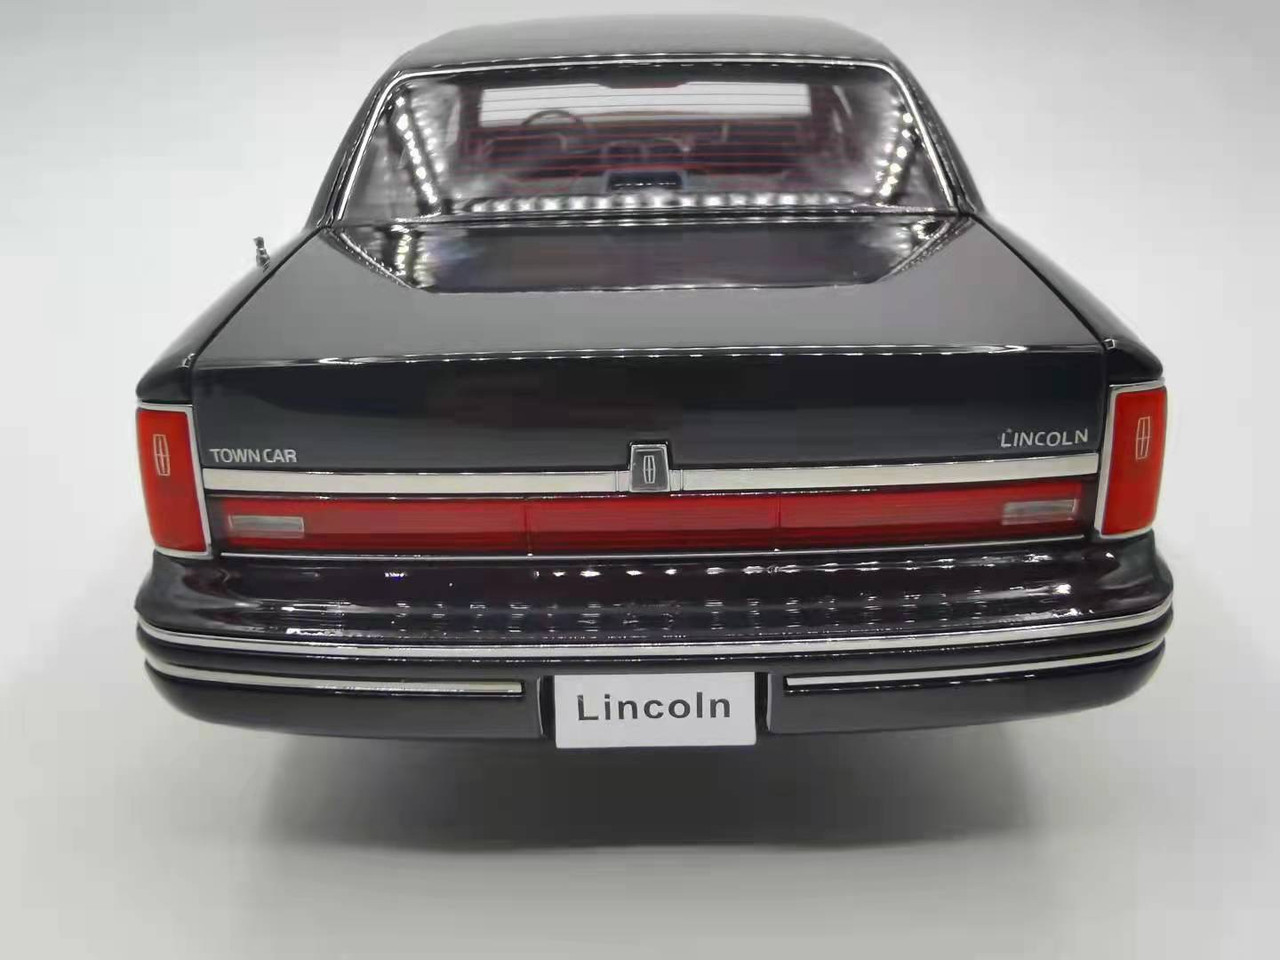 1/18 Dealer Edition 1990 Lincoln Town Car (2nd Generation FN36/116) Black with White Line Tires Diecast Car Model